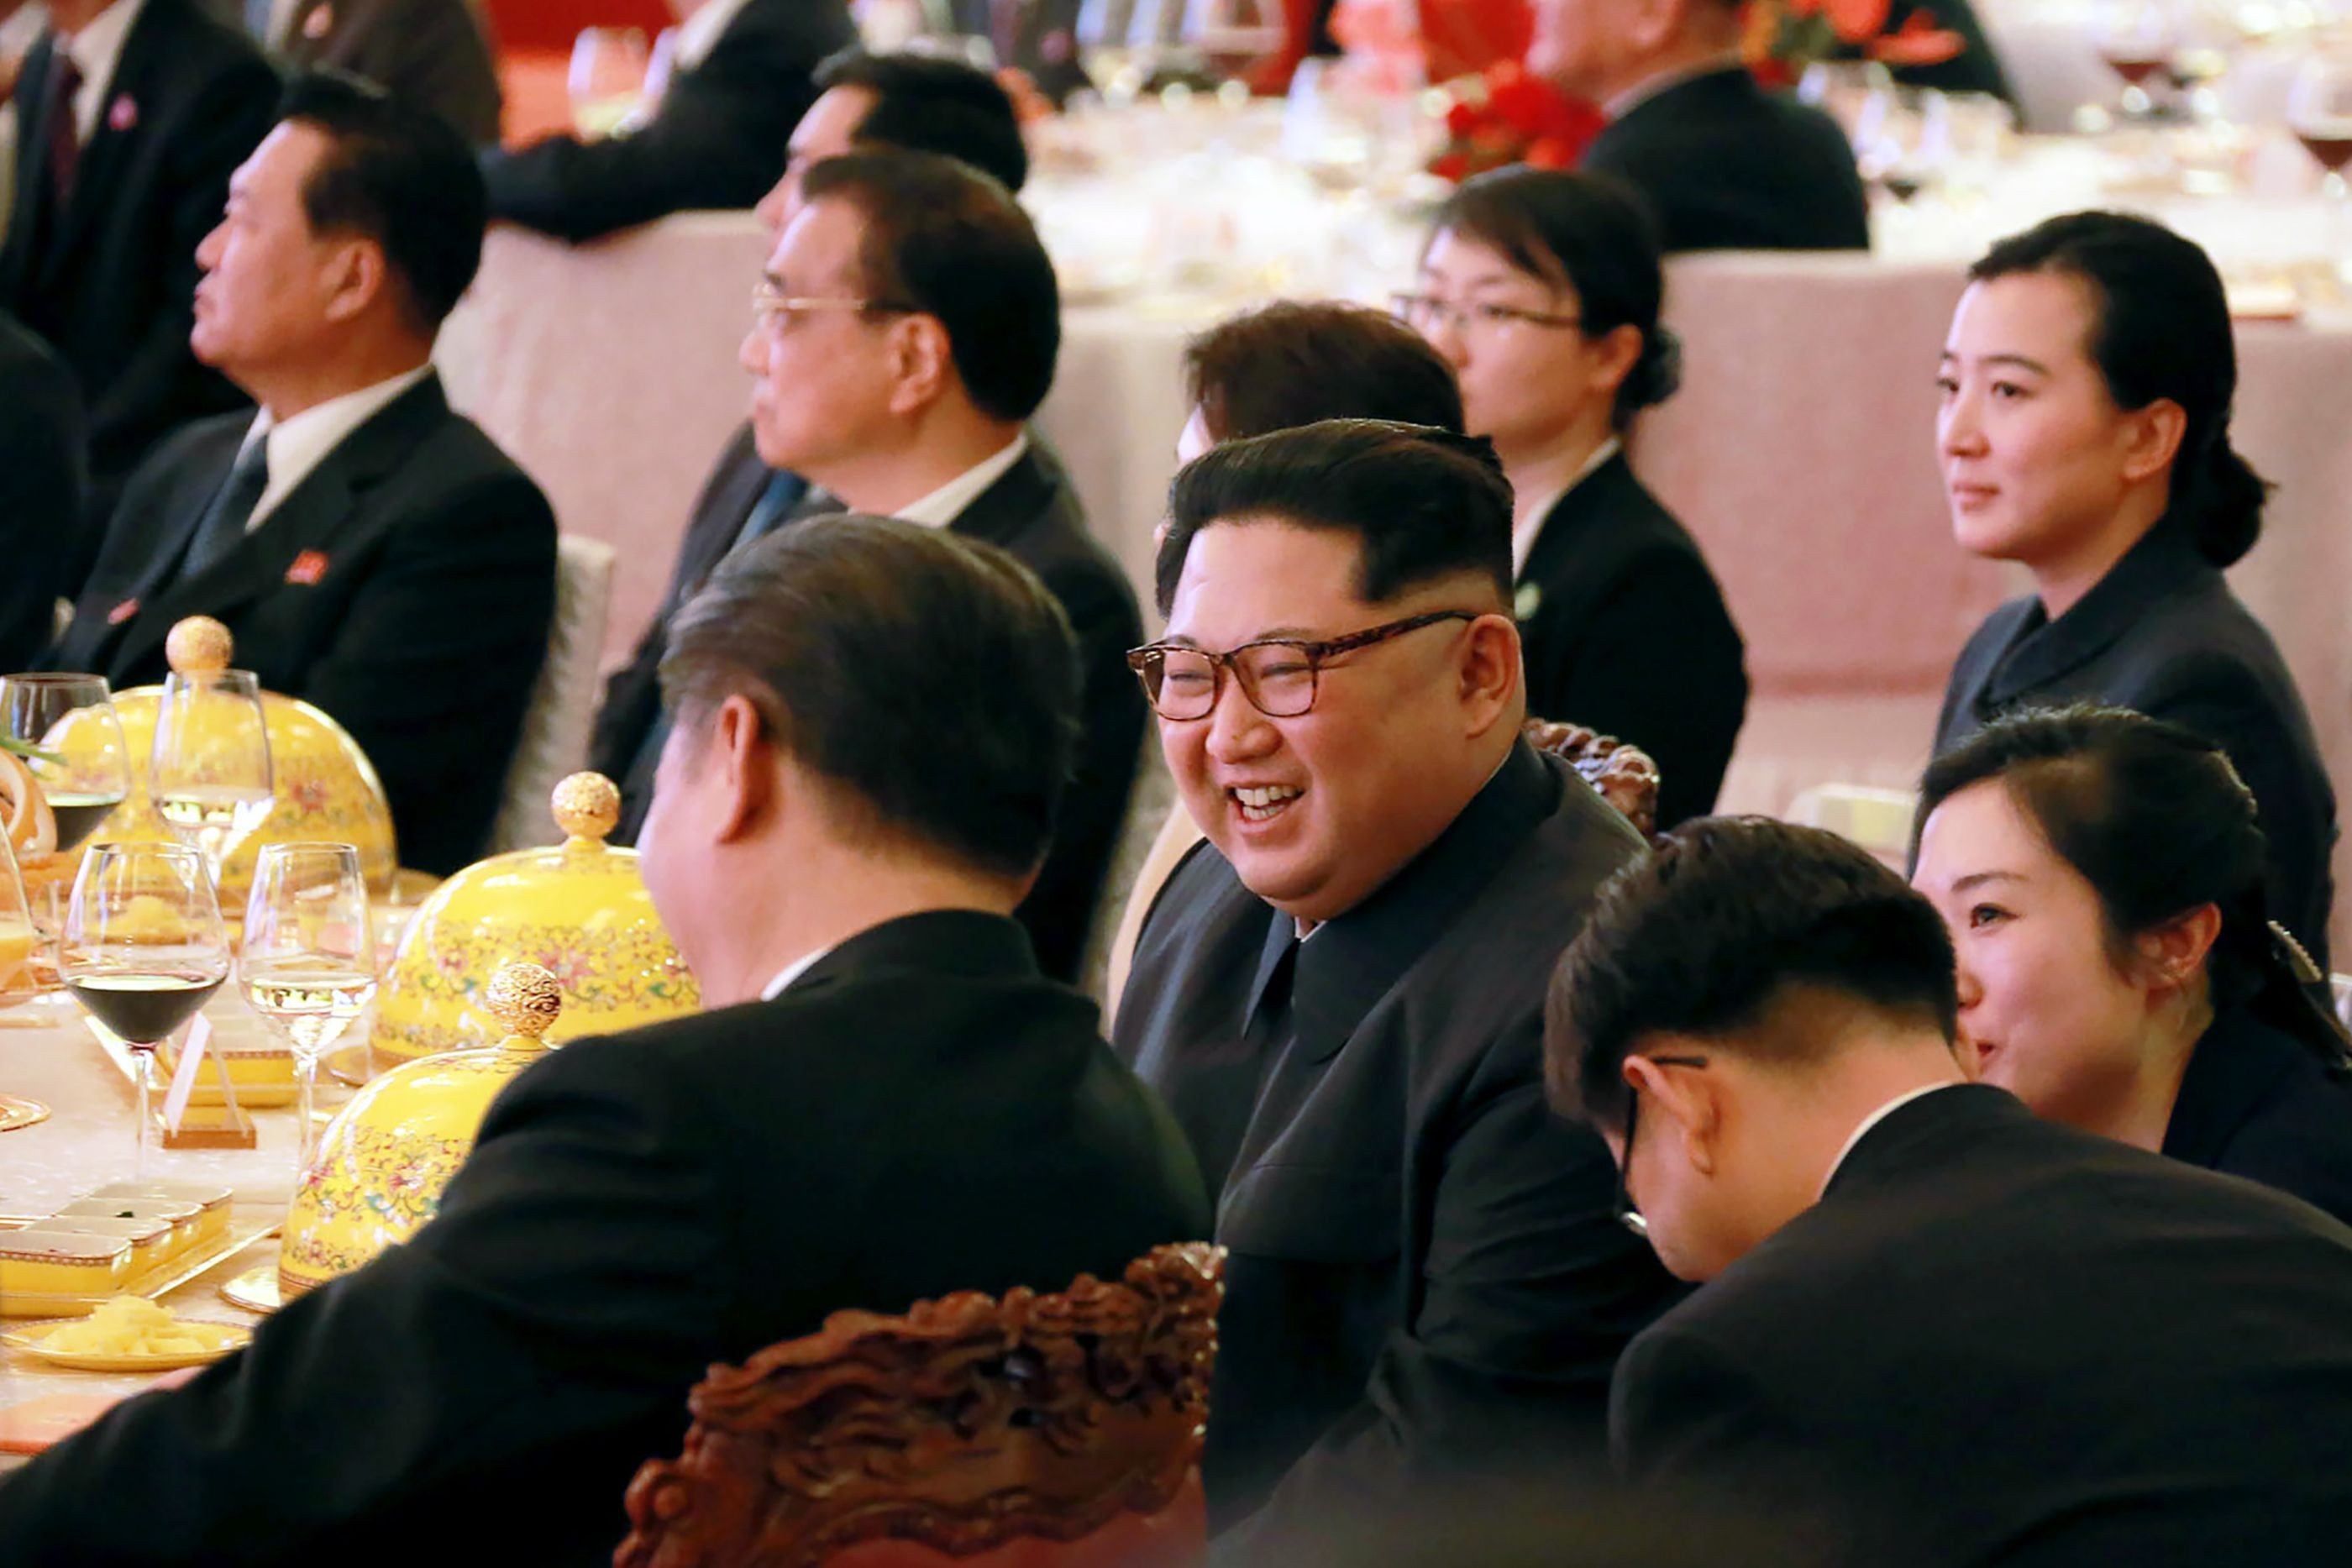 Conventional wisdom on the Kim regime has been that it is unpredictable and downright crazy. But that has never really been true